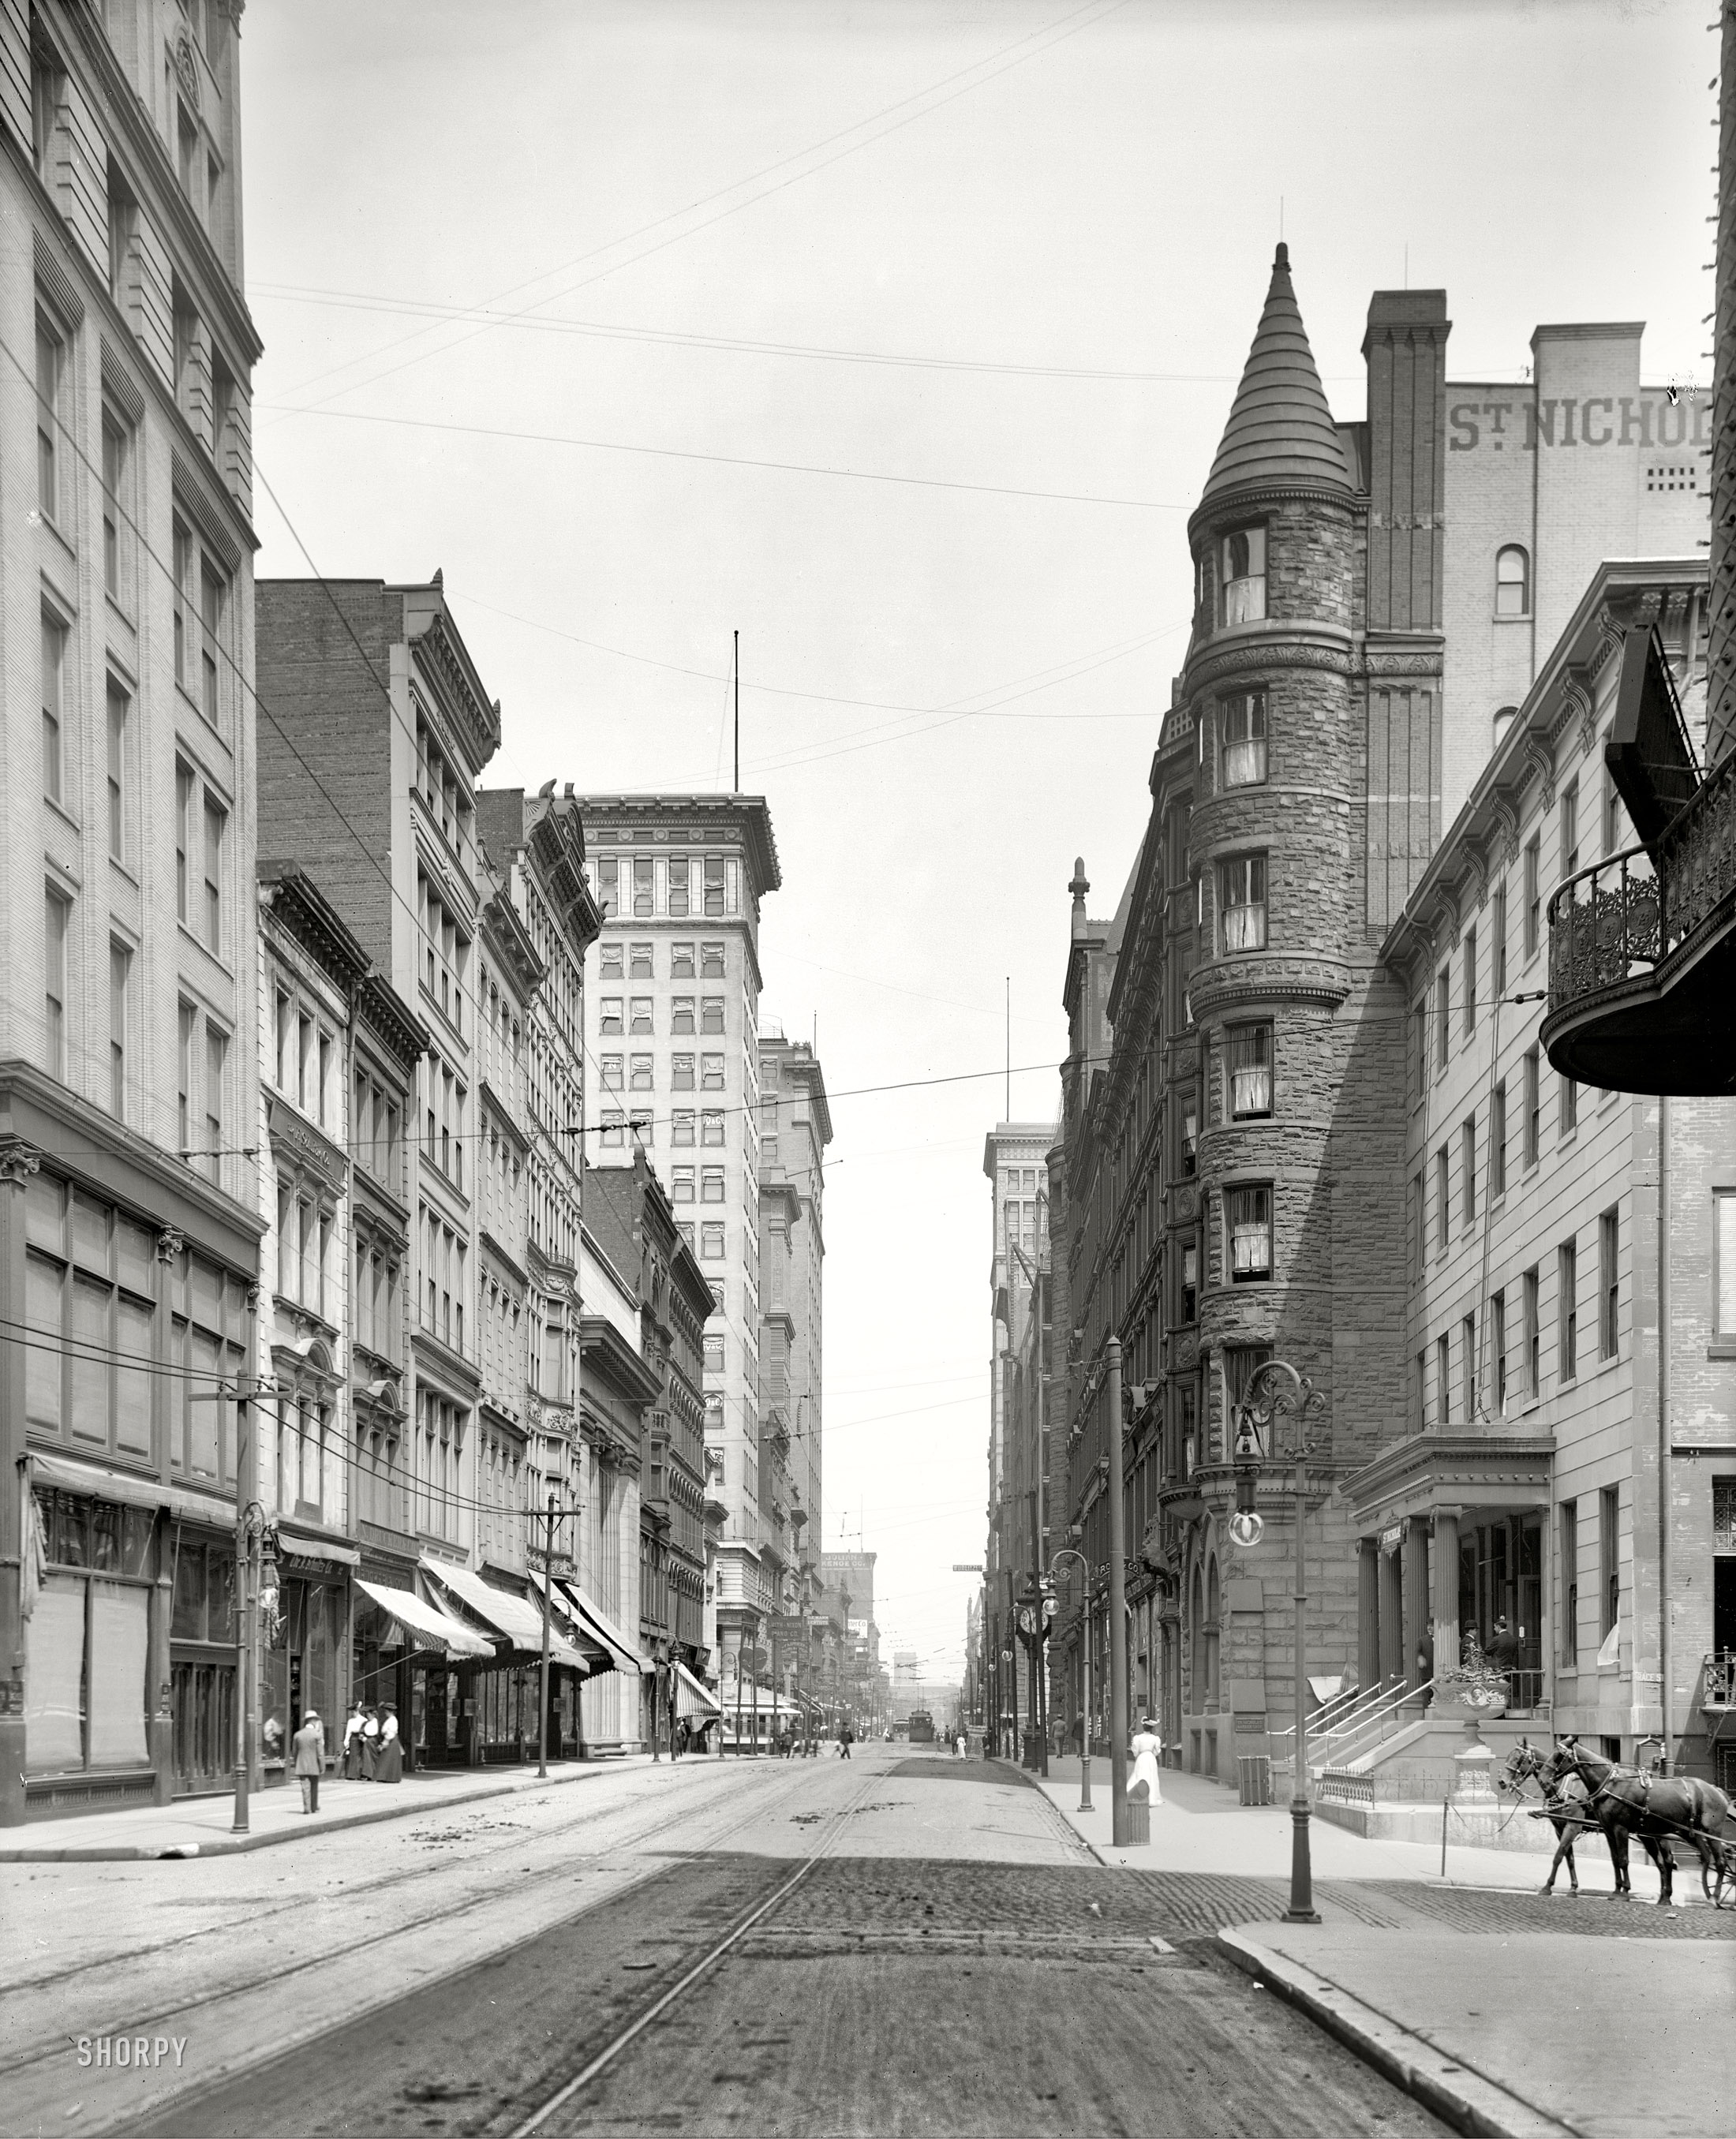 Cincinnati, Ohio, circa 1910. "Fourth Street east from Race Street." 8x10 inch dry plate glass negative, Detroit Publishing Company. View full size.